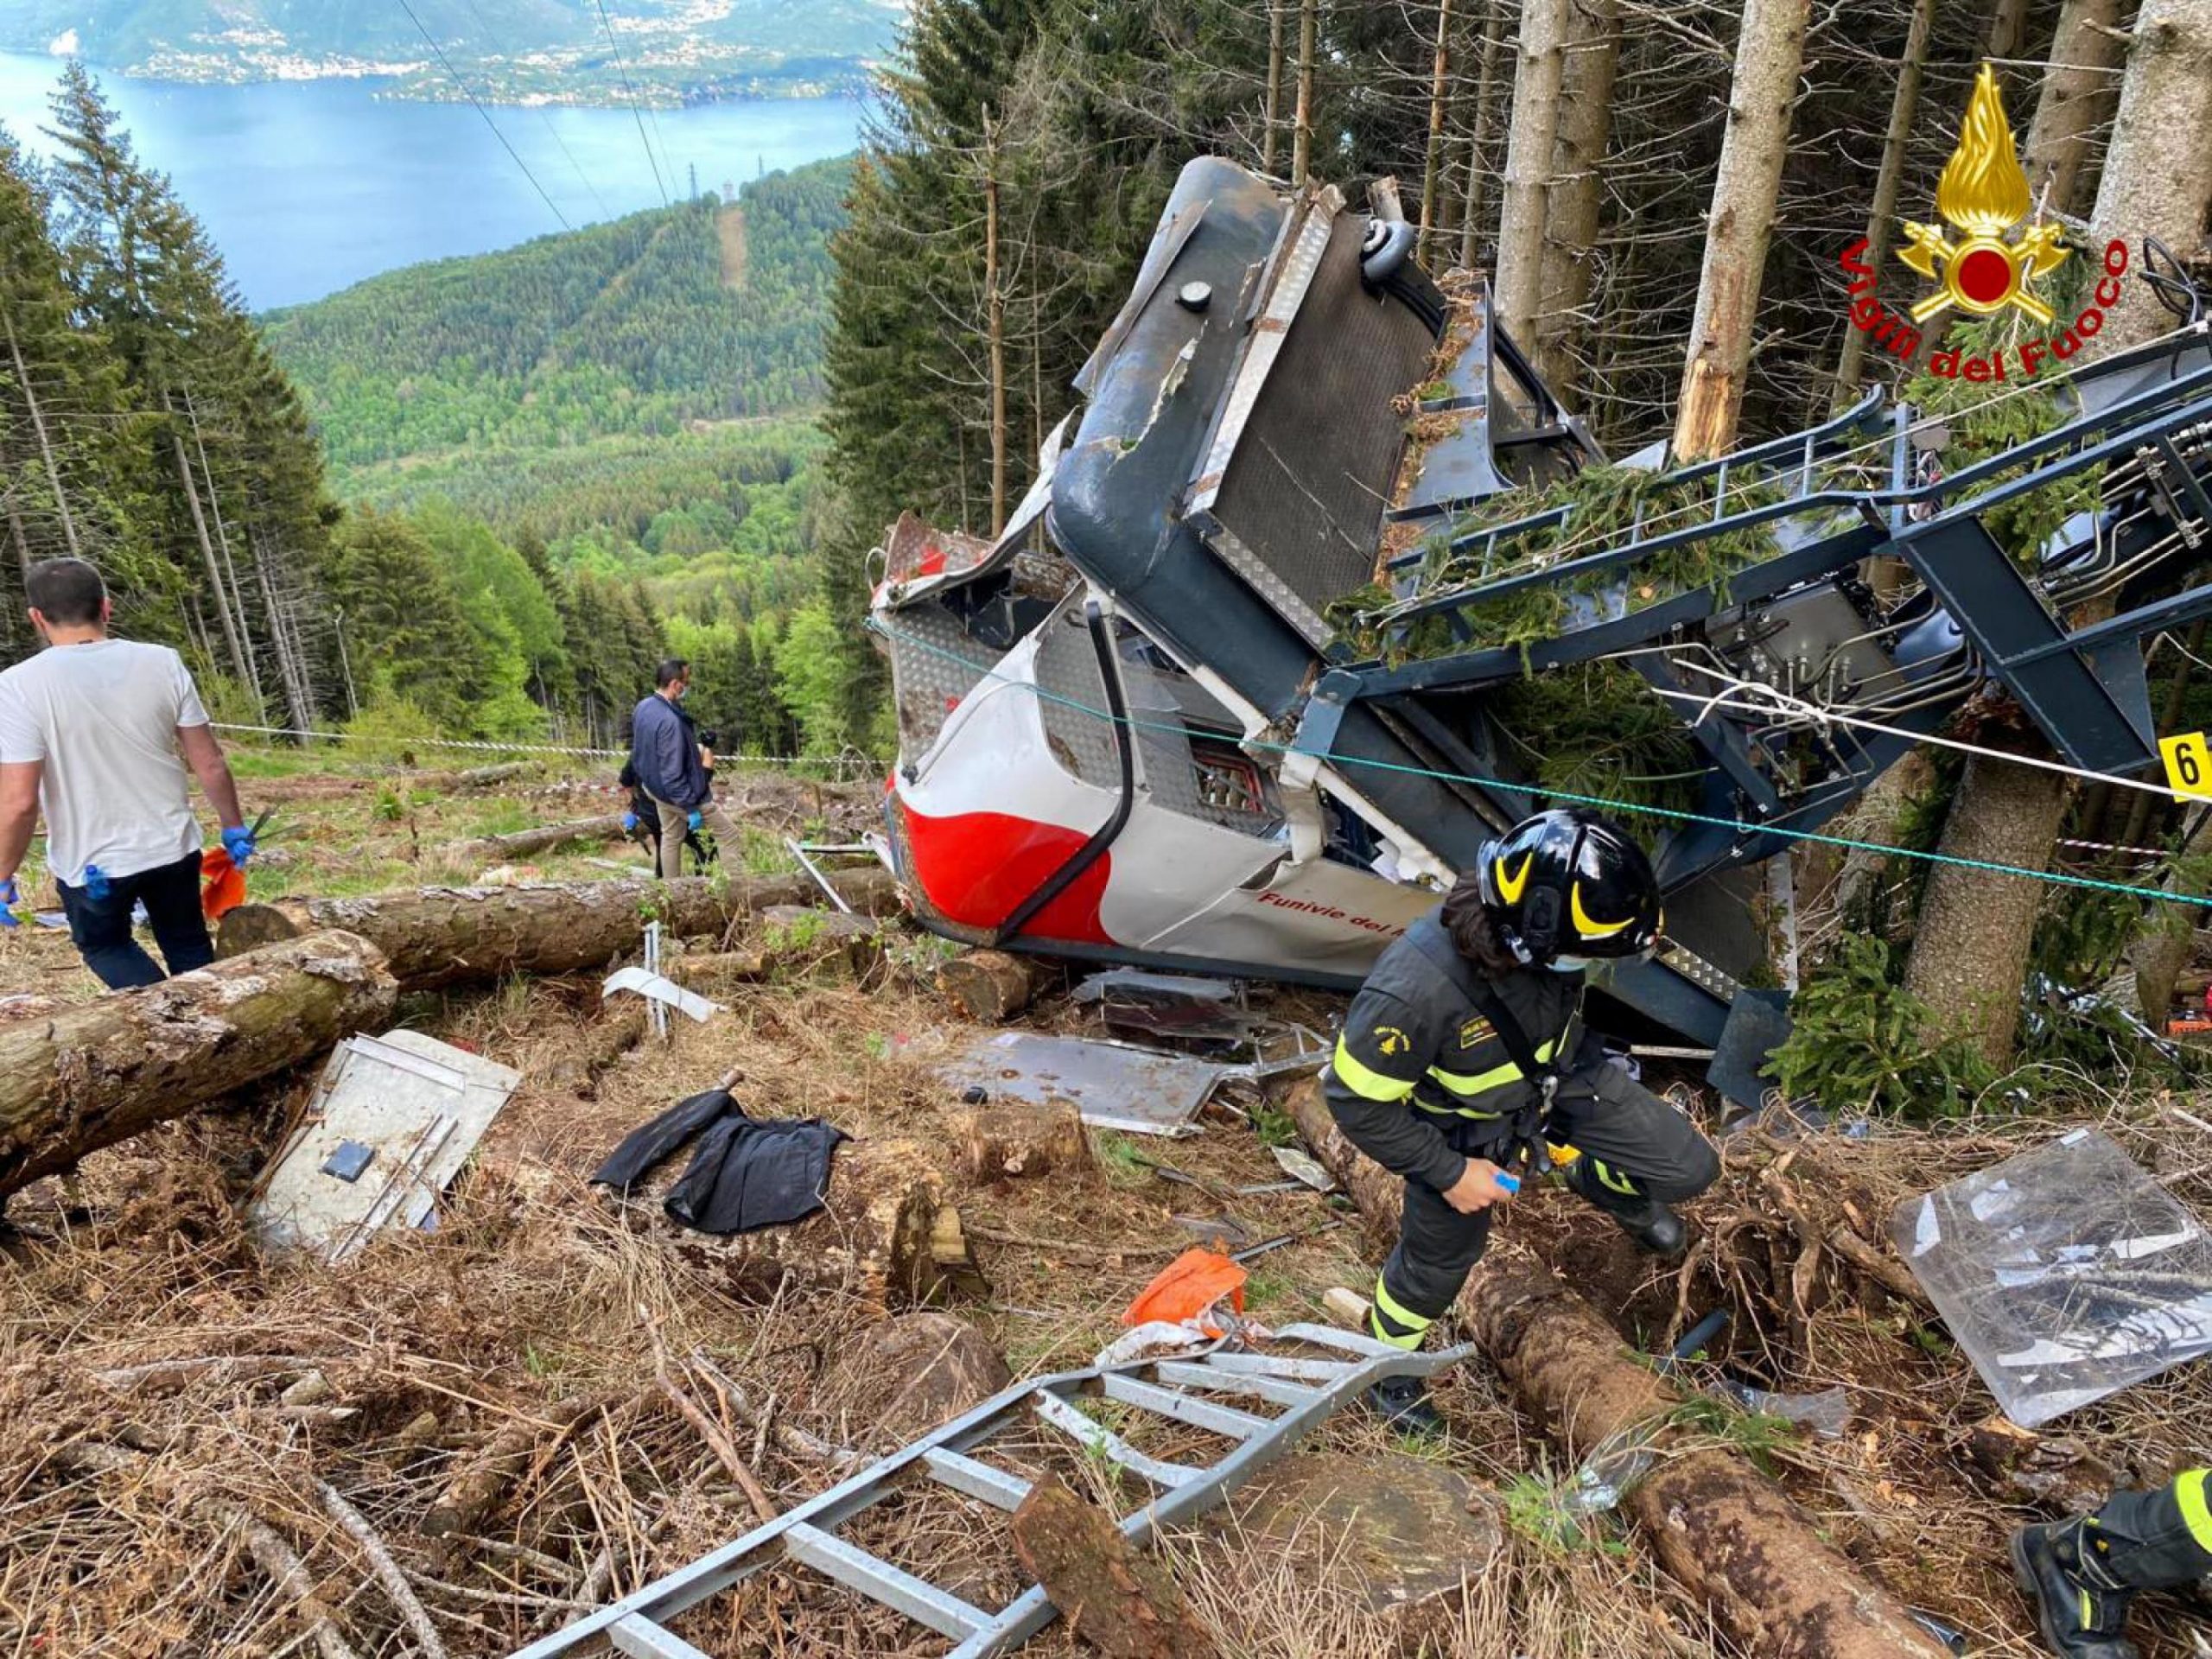 epa09223878 A handout photo made available by Italian Fire and Rescue Service shows Rescuers at work at the area of the cable car accident, near Lake Maggiore, northern Italy, 23 May 2021. The cable car that connects Stresa with Mottarone has crashed, claiming 14 lives, according to the latest toll. The accident has been caused by the failure of a rope, in the highest part of the route which, starting from Lake Maggiore reaches an altitude of 1,491 meters.  EPA/ITALIAN FIRE AND RESCUE SERVICE / HANDOUT  HANDOUT EDITORIAL USE ONLY/NO SALES